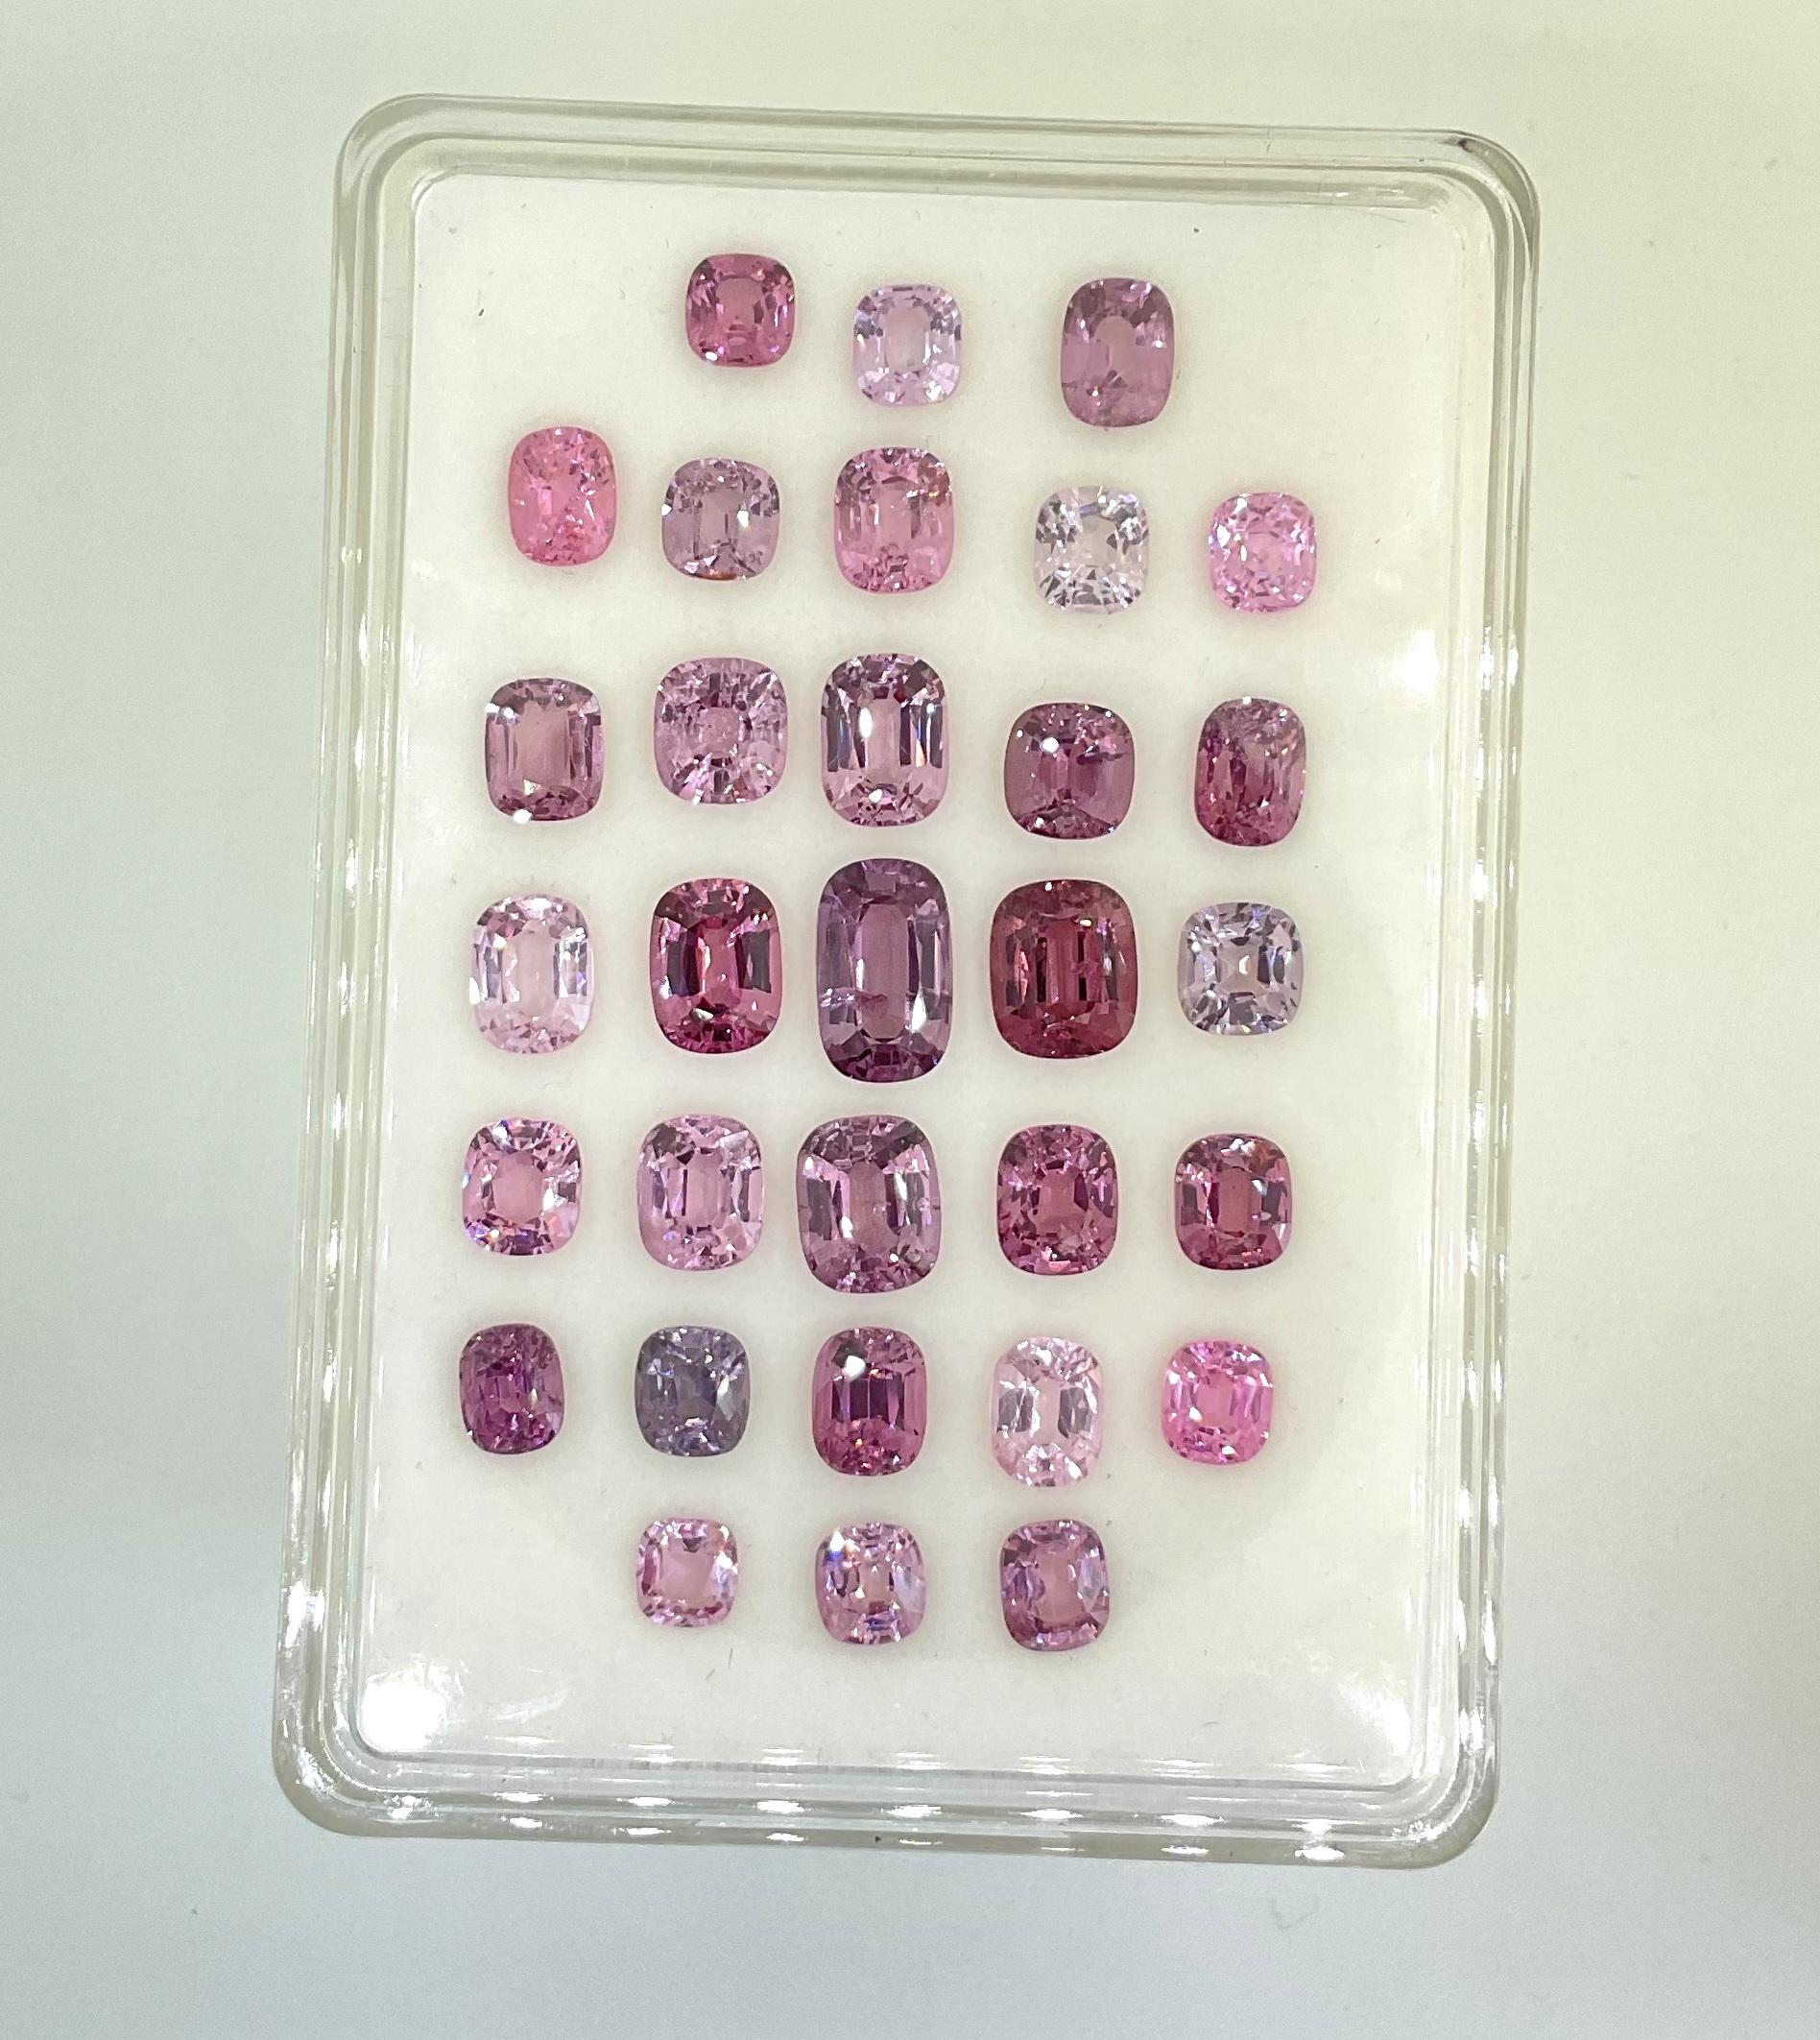 43.85 Carats Pink Spinel Cushion Cut Stone Natural Gemstone For Top Fine Jewelry

Gemstone: Spinel
Weight: 43.85 Carats
Size: 5x5 To 7x11 MM
Pieces: 31
Shape: Cushion